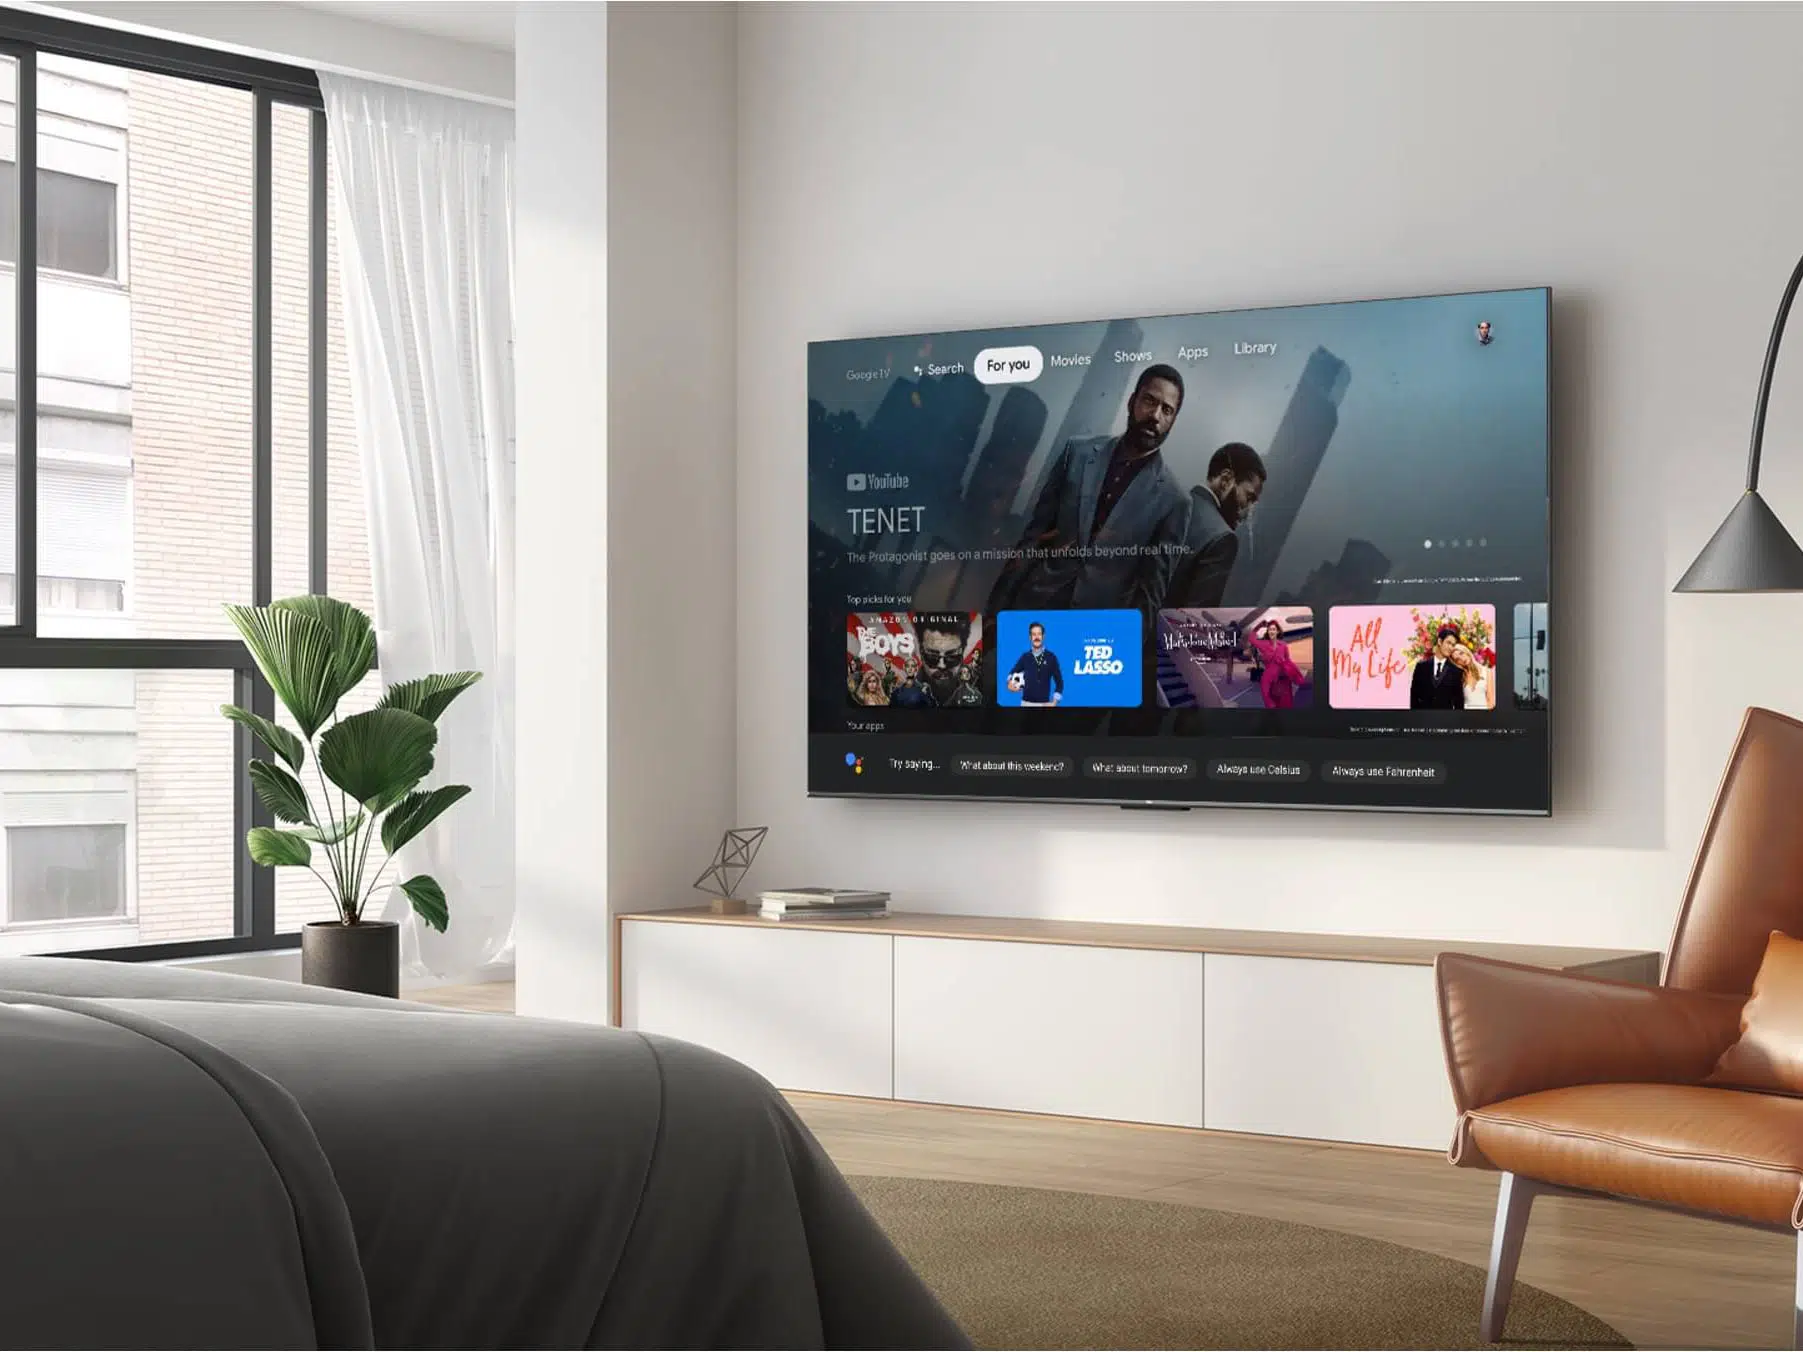 How To Watch Movies On Smart TV